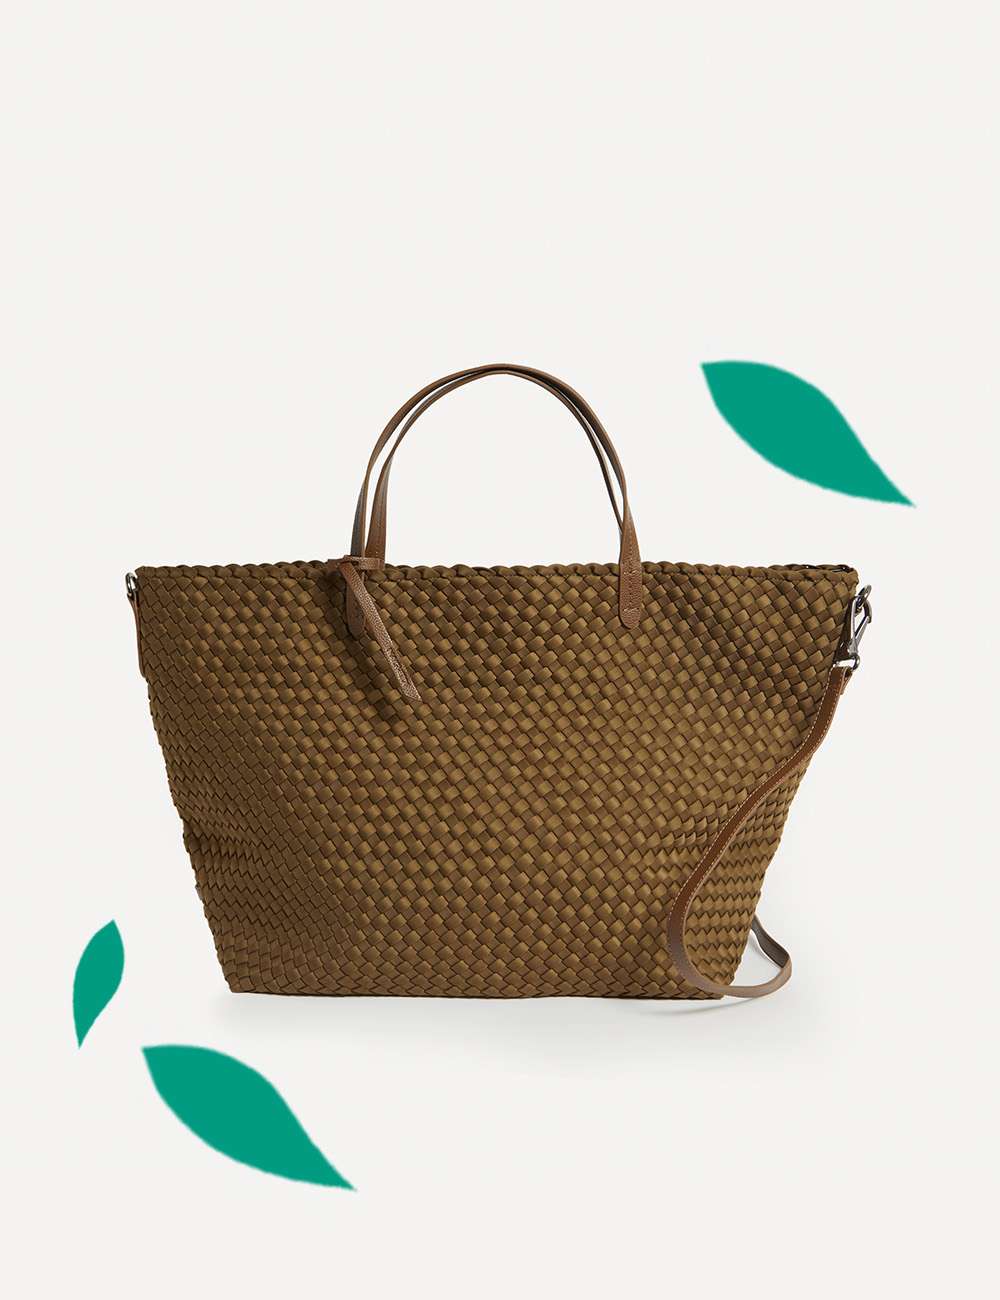 Marks & Spencer's bamboo handle tote looks just like Princess